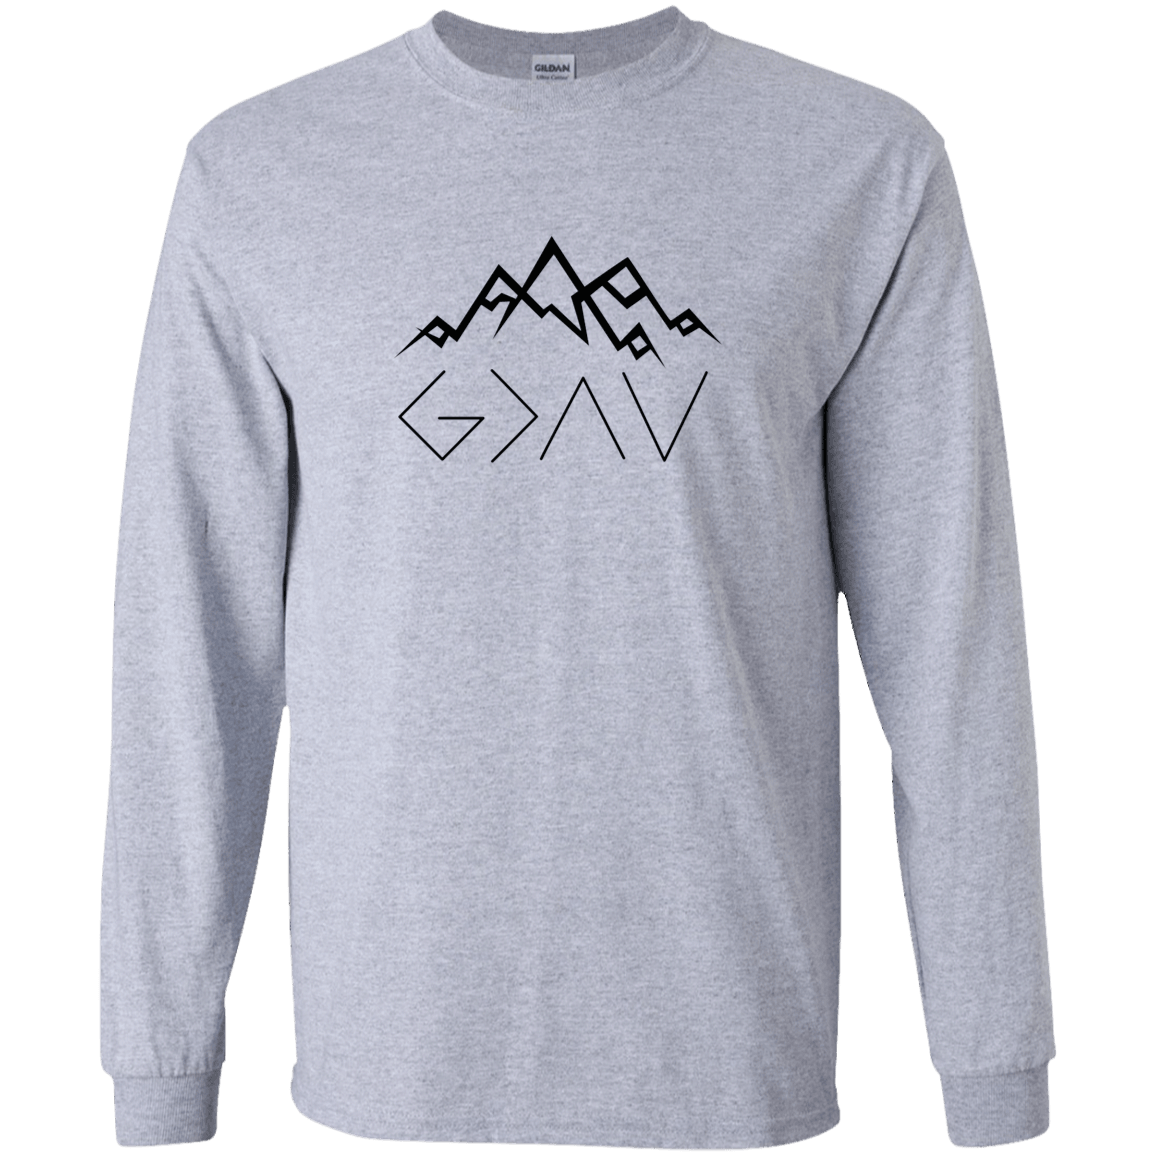 Designs by MyUtopia Shout Out:God is Greater than My Highs and Lows John 16:33 Long Sleeve Ultra Cotton Unisex T-Shirt,Sport Grey / S,Long Sleeve T-Shirts